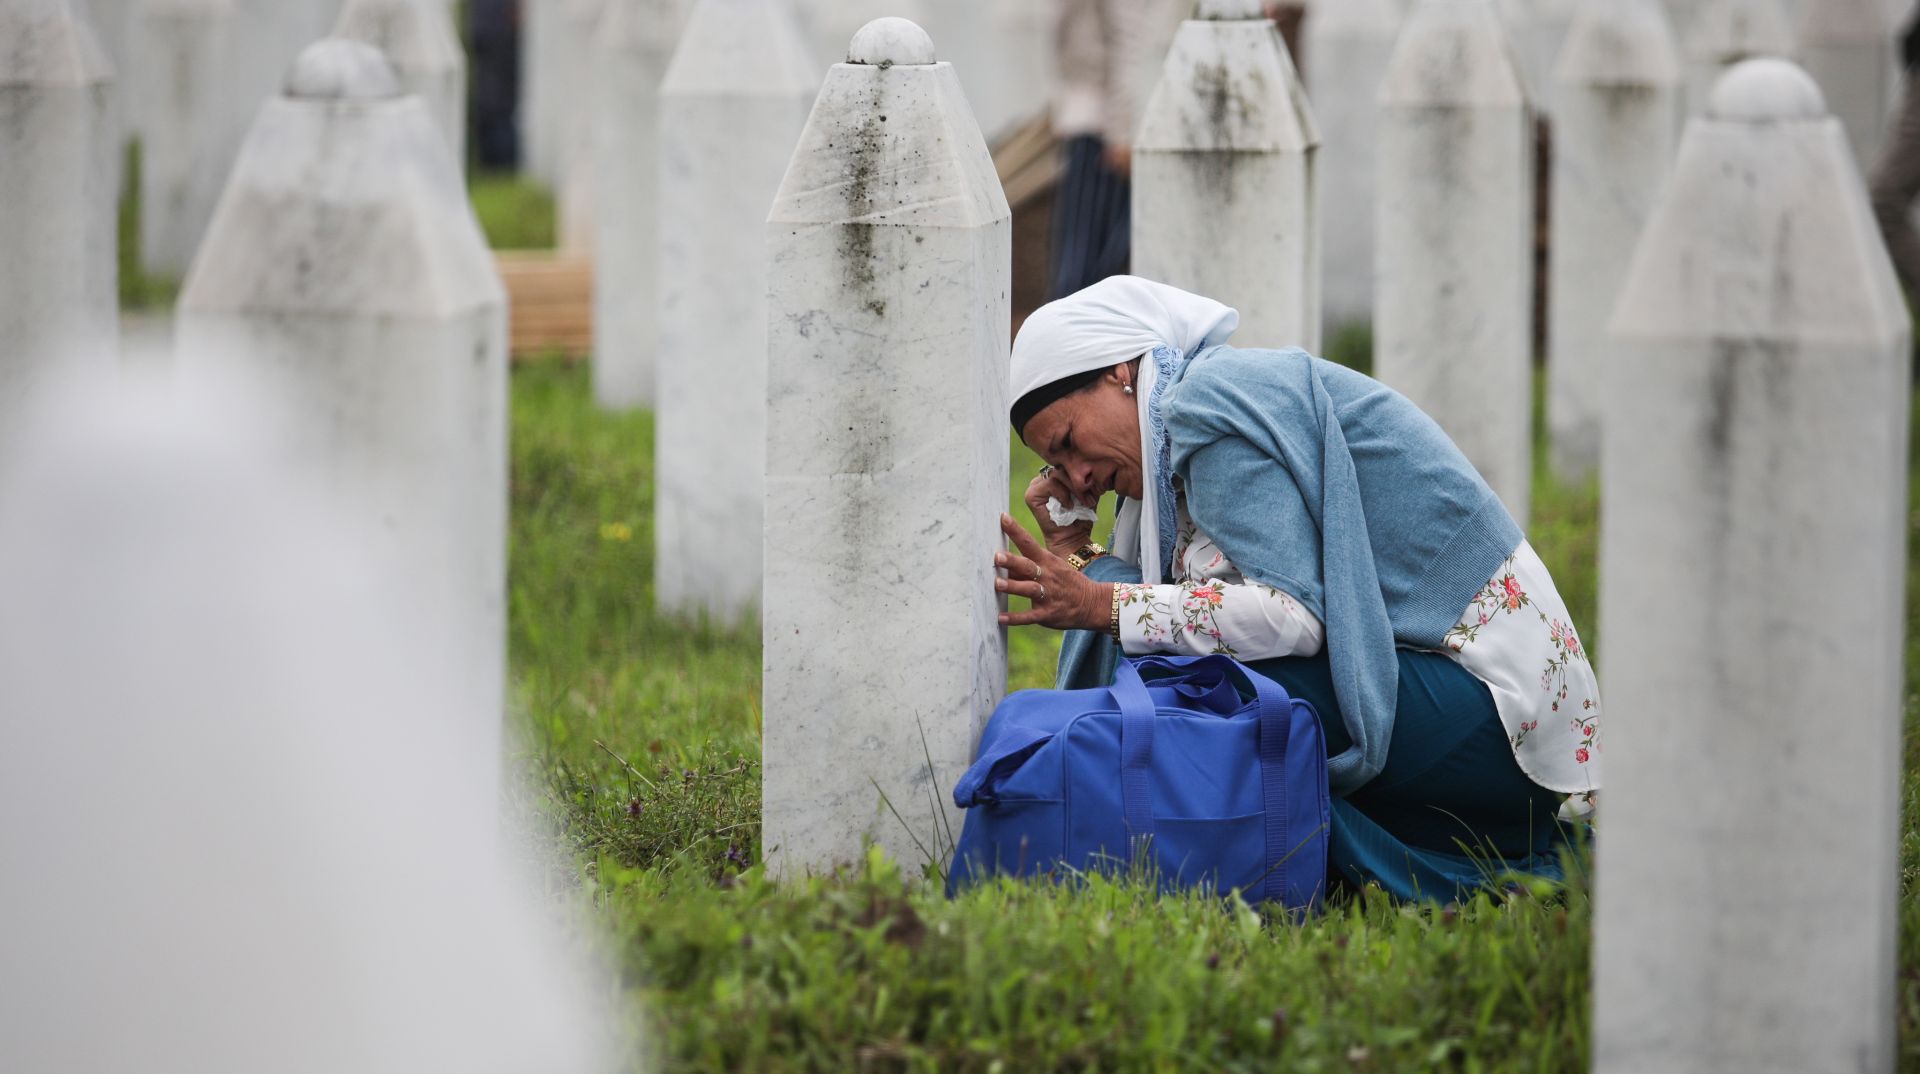 epa08529982 (FILE) - A mourning woman sits between gravestones on the Potocari Memorial Center in Srebrenica, Bosnia and Herzegovina, 11 July 2018 (reissued 06 July 2020). A group of 35 victims of the war crime massacre were transferred from the  town of Visoko to be buried on the city's Potocari Memorial Center on the occasion of the 23rd anniversary of the massacre. A quarter of a century ago, the world witnessed the worst mass murder on European soil since World War II. Some 7,000-8,000 Bosniaks were slaughtered and 20,000 civilians were forcibly displaced in an act of ethnic cleansing perpetrated in the small eastern Bosnian village of Srebrenica, whose name will forever be linked to the infamous 1995 massacre. Today, 25 years after the massacre, the memory of its victims is kept alive by several institutions, such as the Museum of Crimes Against Humanity and Genocide in Sarajevo or a permanent exhibit at the 'Memorial Center Srebrenica-Potocari' that now occupies the former headquarters of the Dutch UNPROFOR Battalion.  EPA/JASMIN BRUTUS  ATTENTION: This Image is part of a PHOTO SET